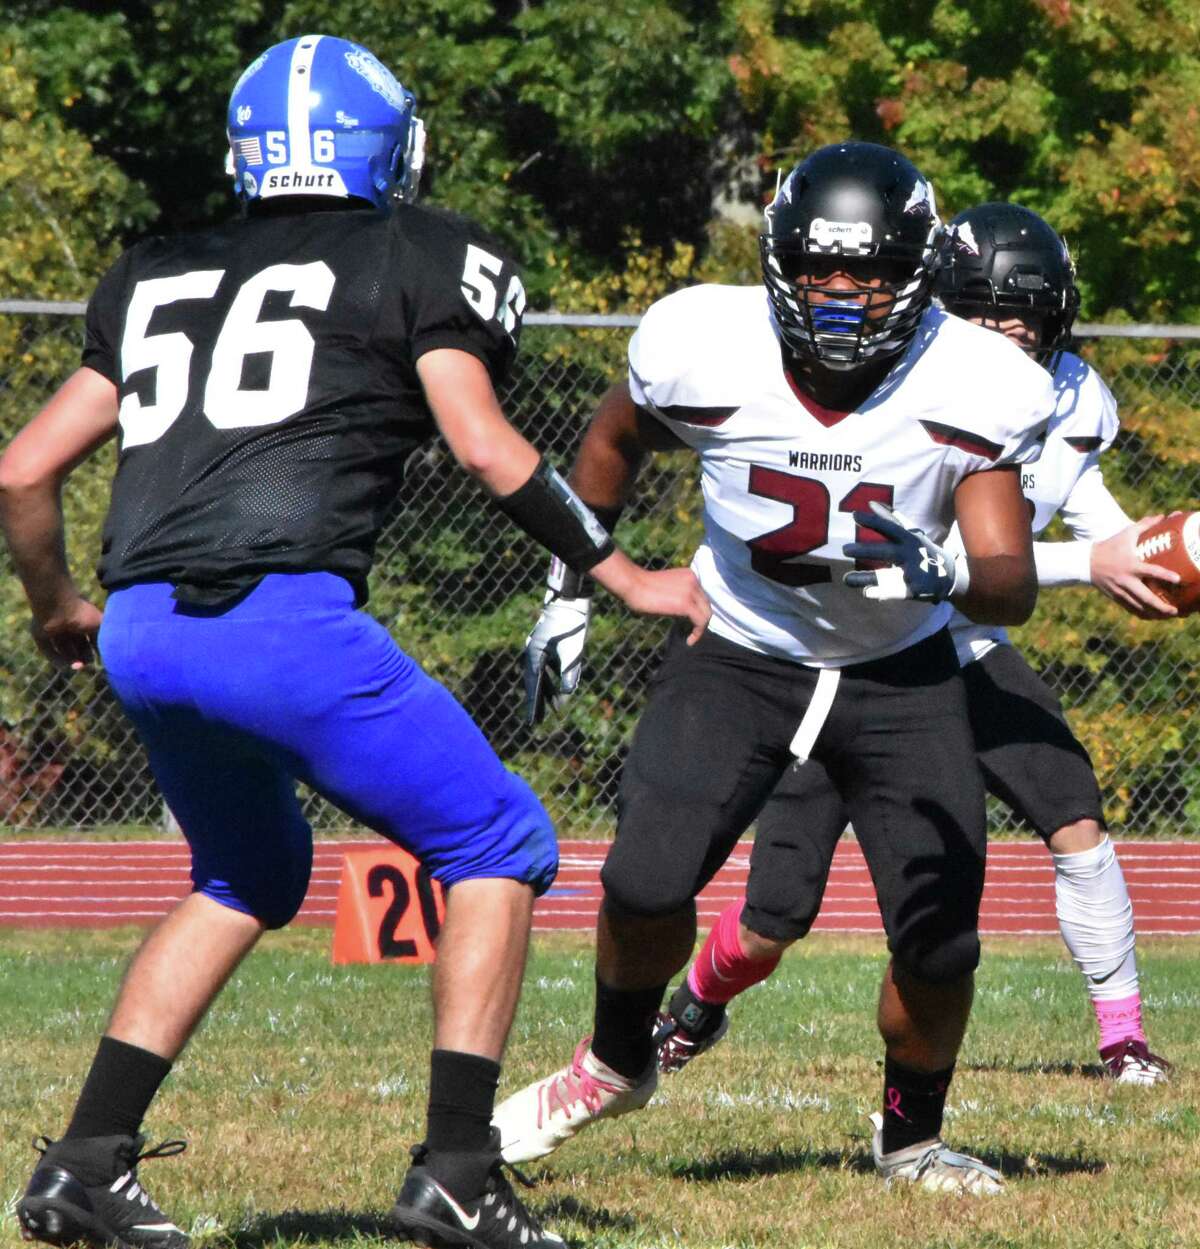 Action between the Stafford co-op and Valley Regional co-op at Stafford high school on Saturday, Oct. 5, 2019. (Pete Paguaga, Hearst Connecticut Media)